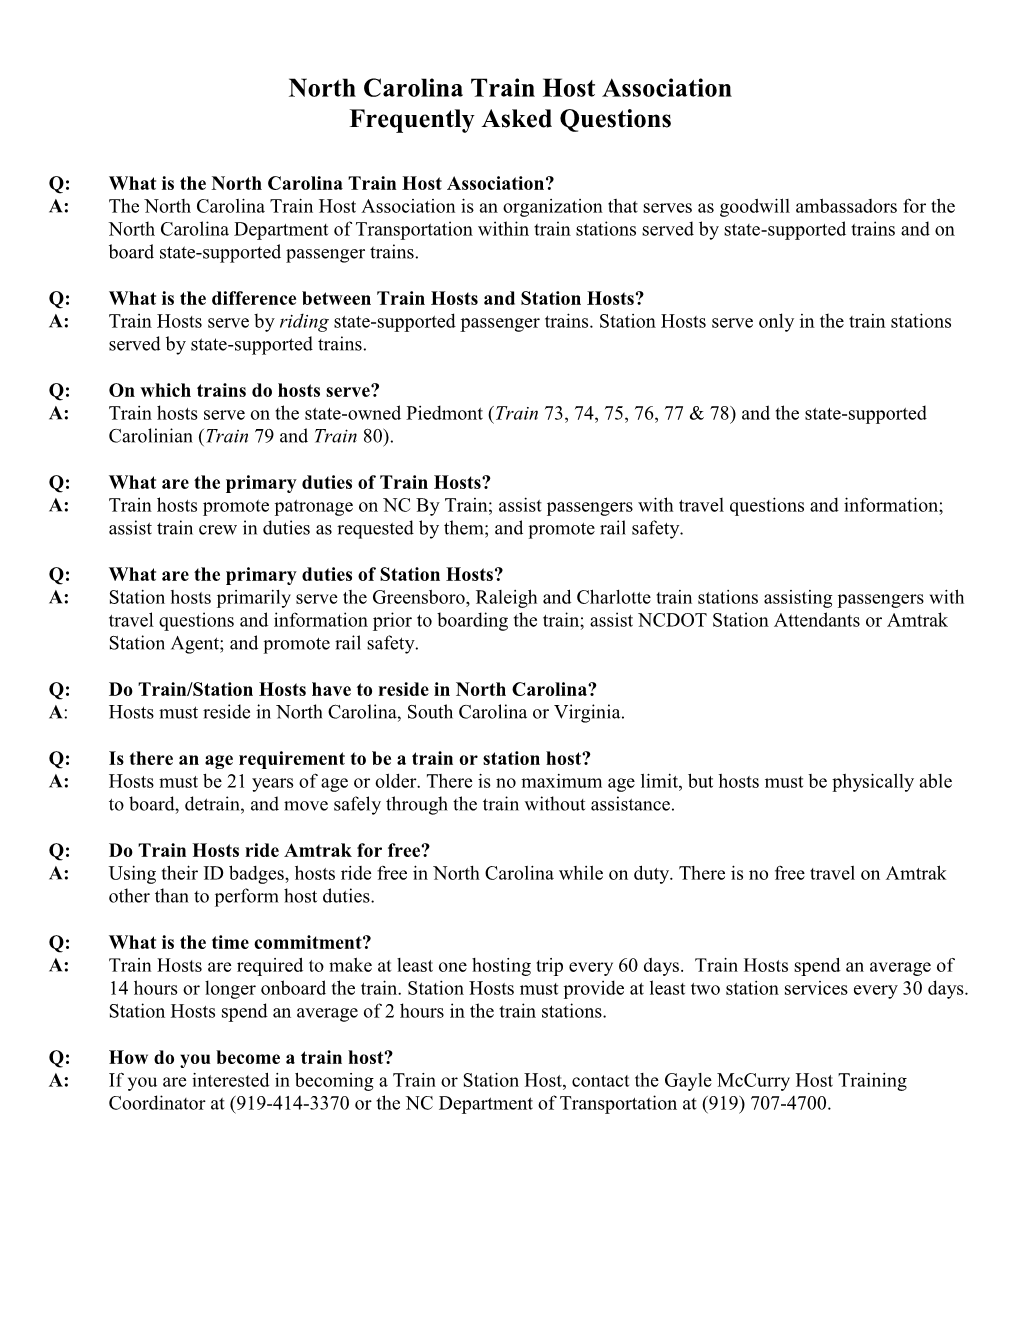 North Carolina Train Host Association Frequently Asked Questions